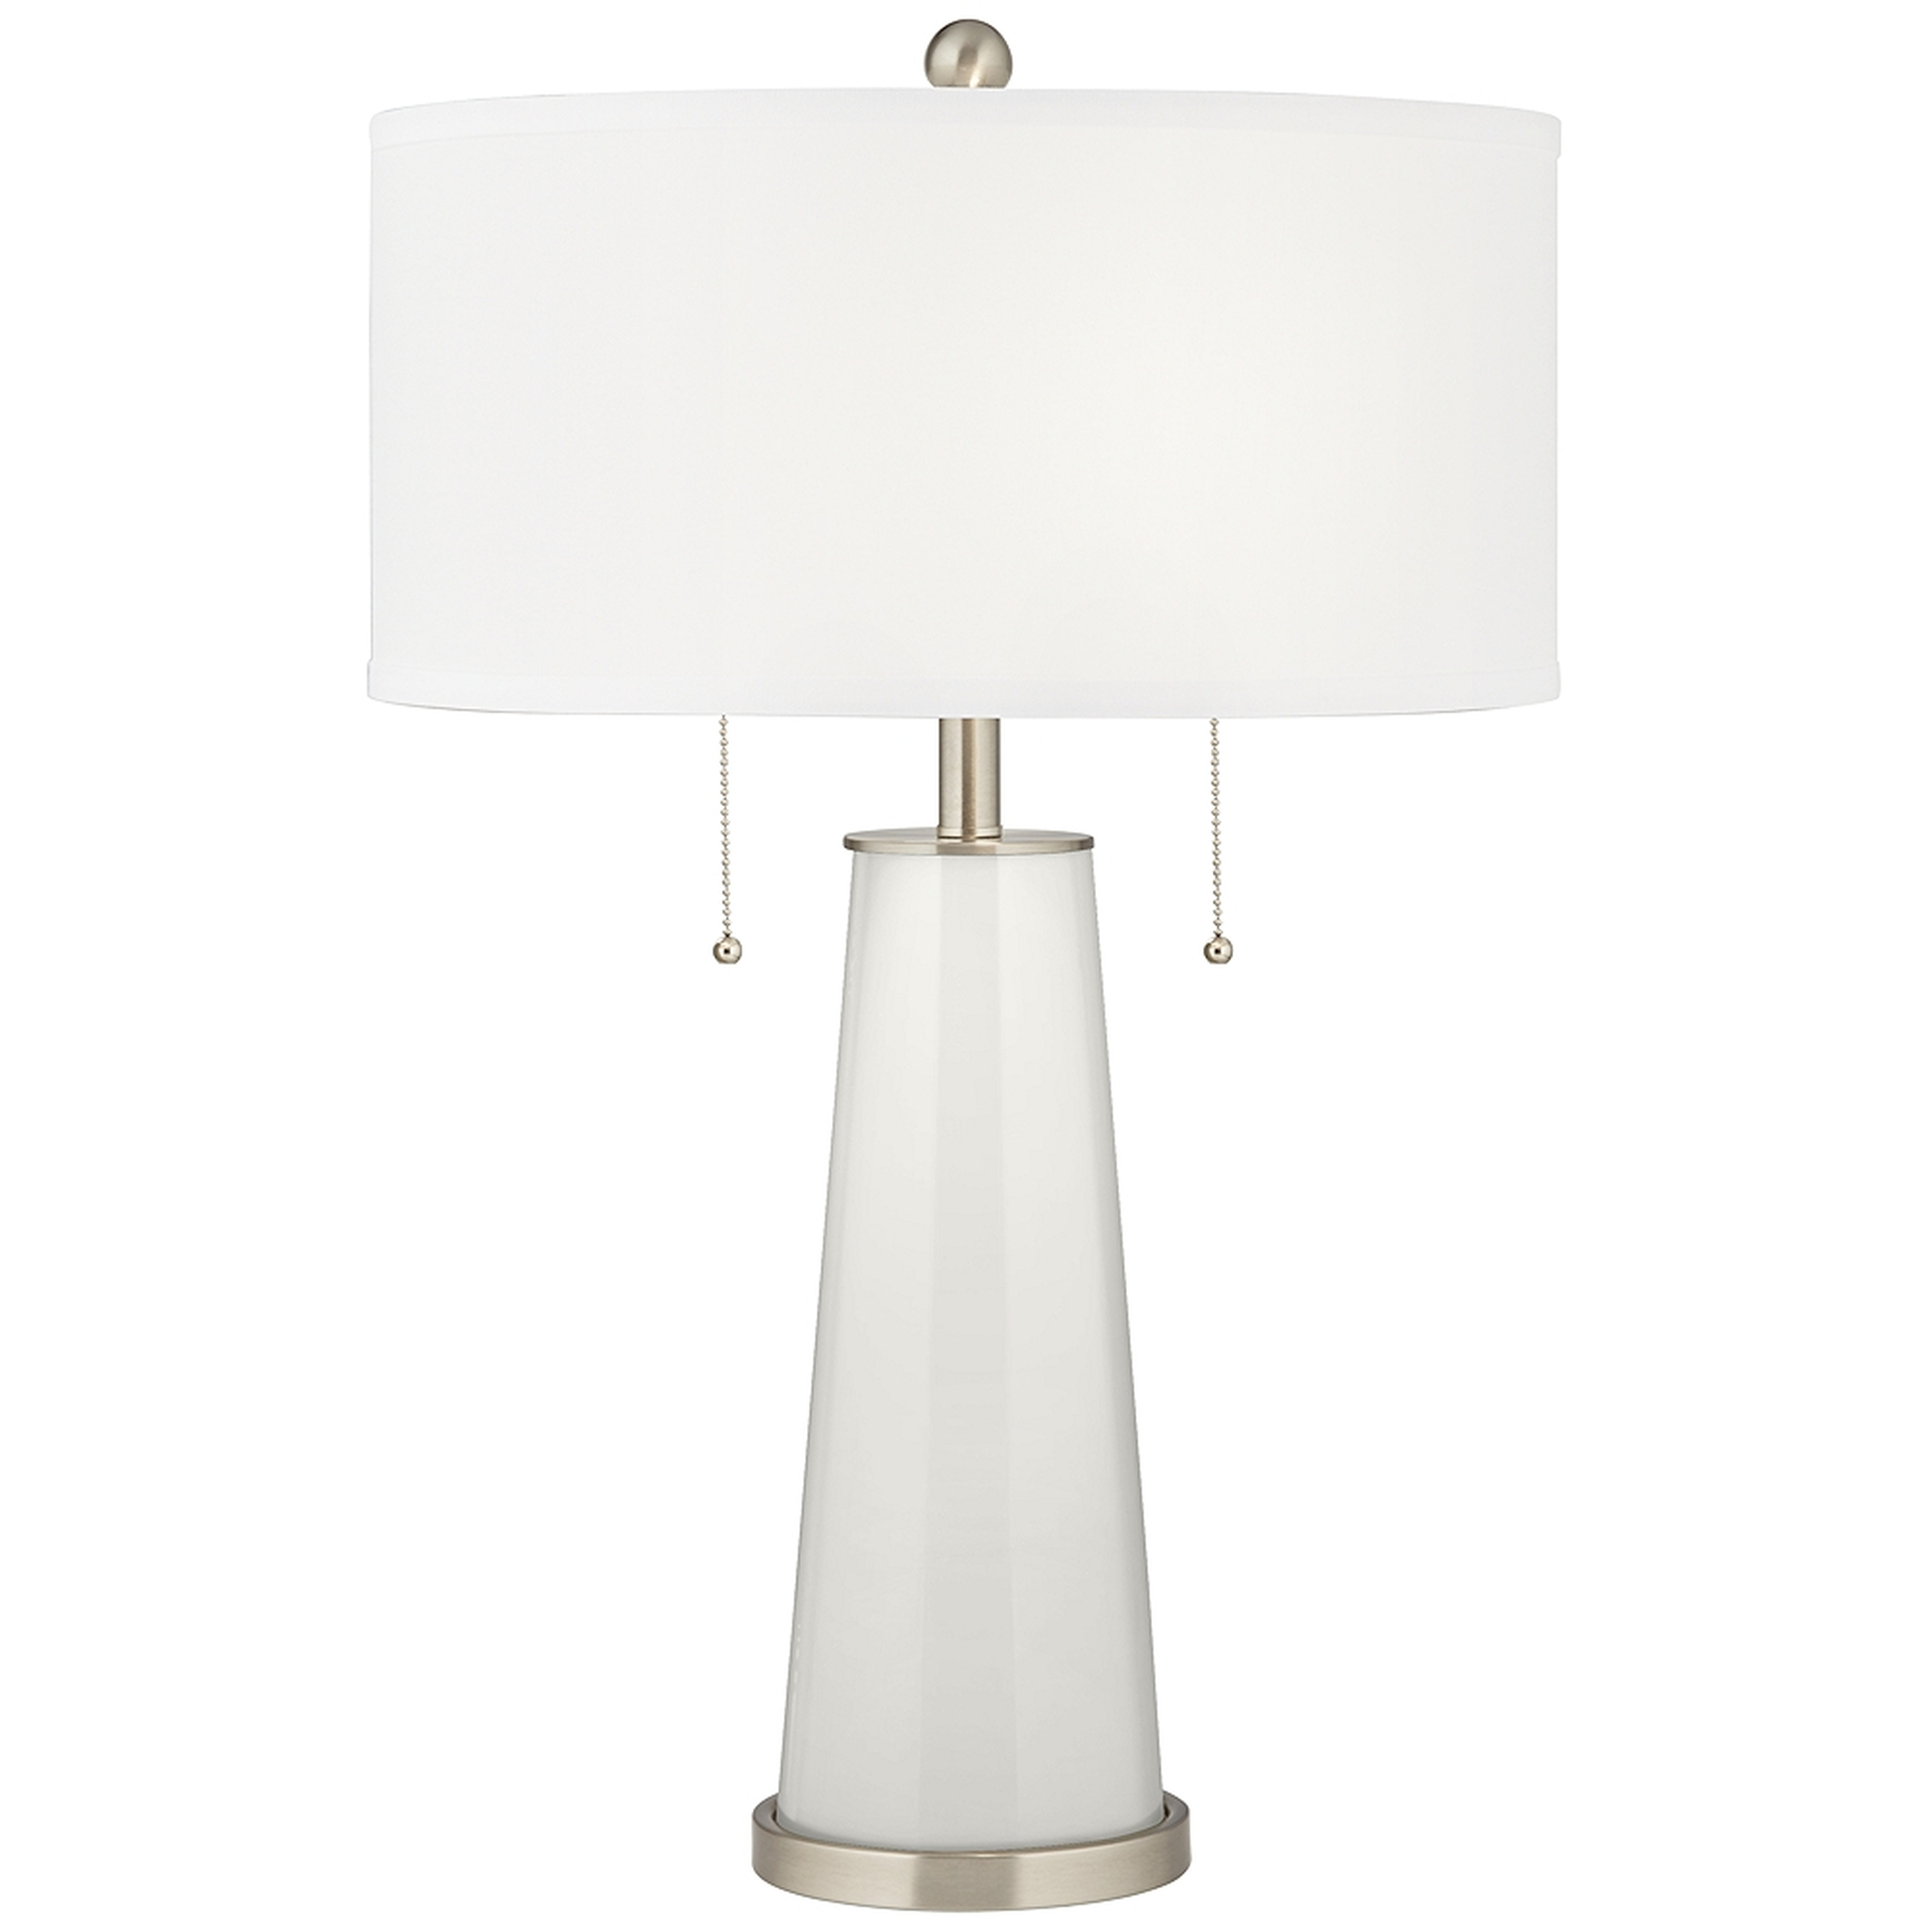 Winter White Peggy Glass Table Lamp - Style # 93Y64 - Lamps Plus